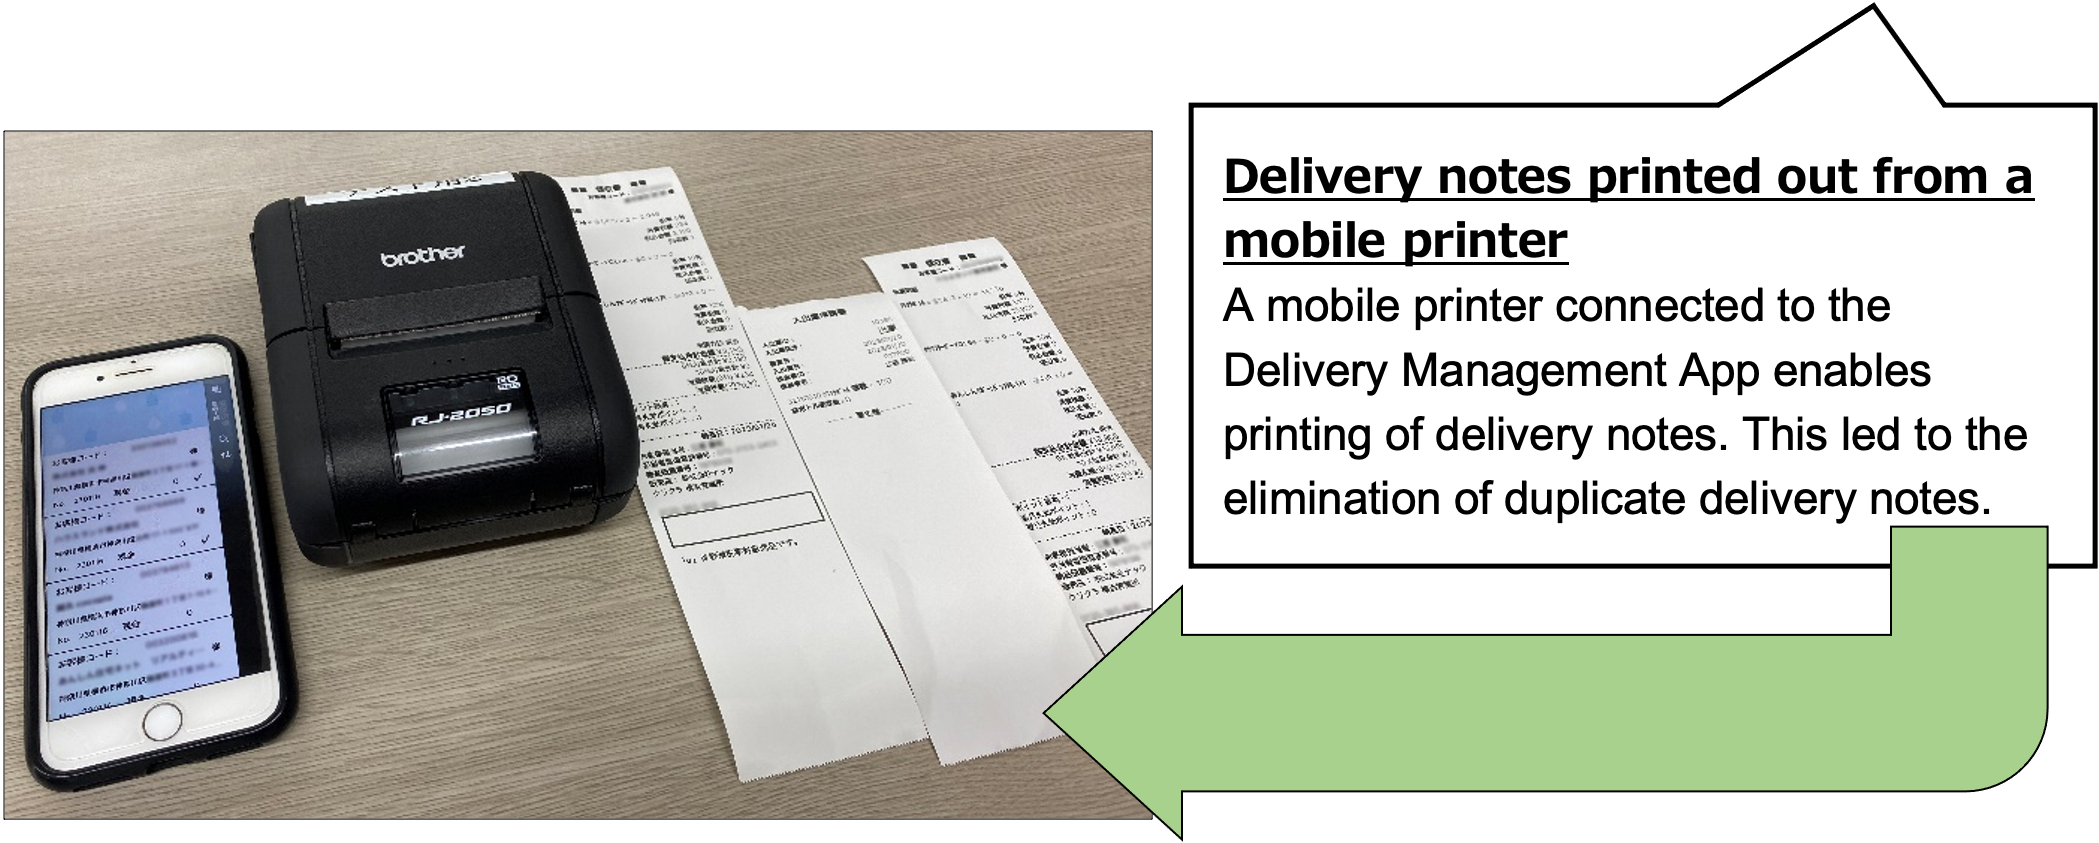 Delivery notes printed out from a mobile printer